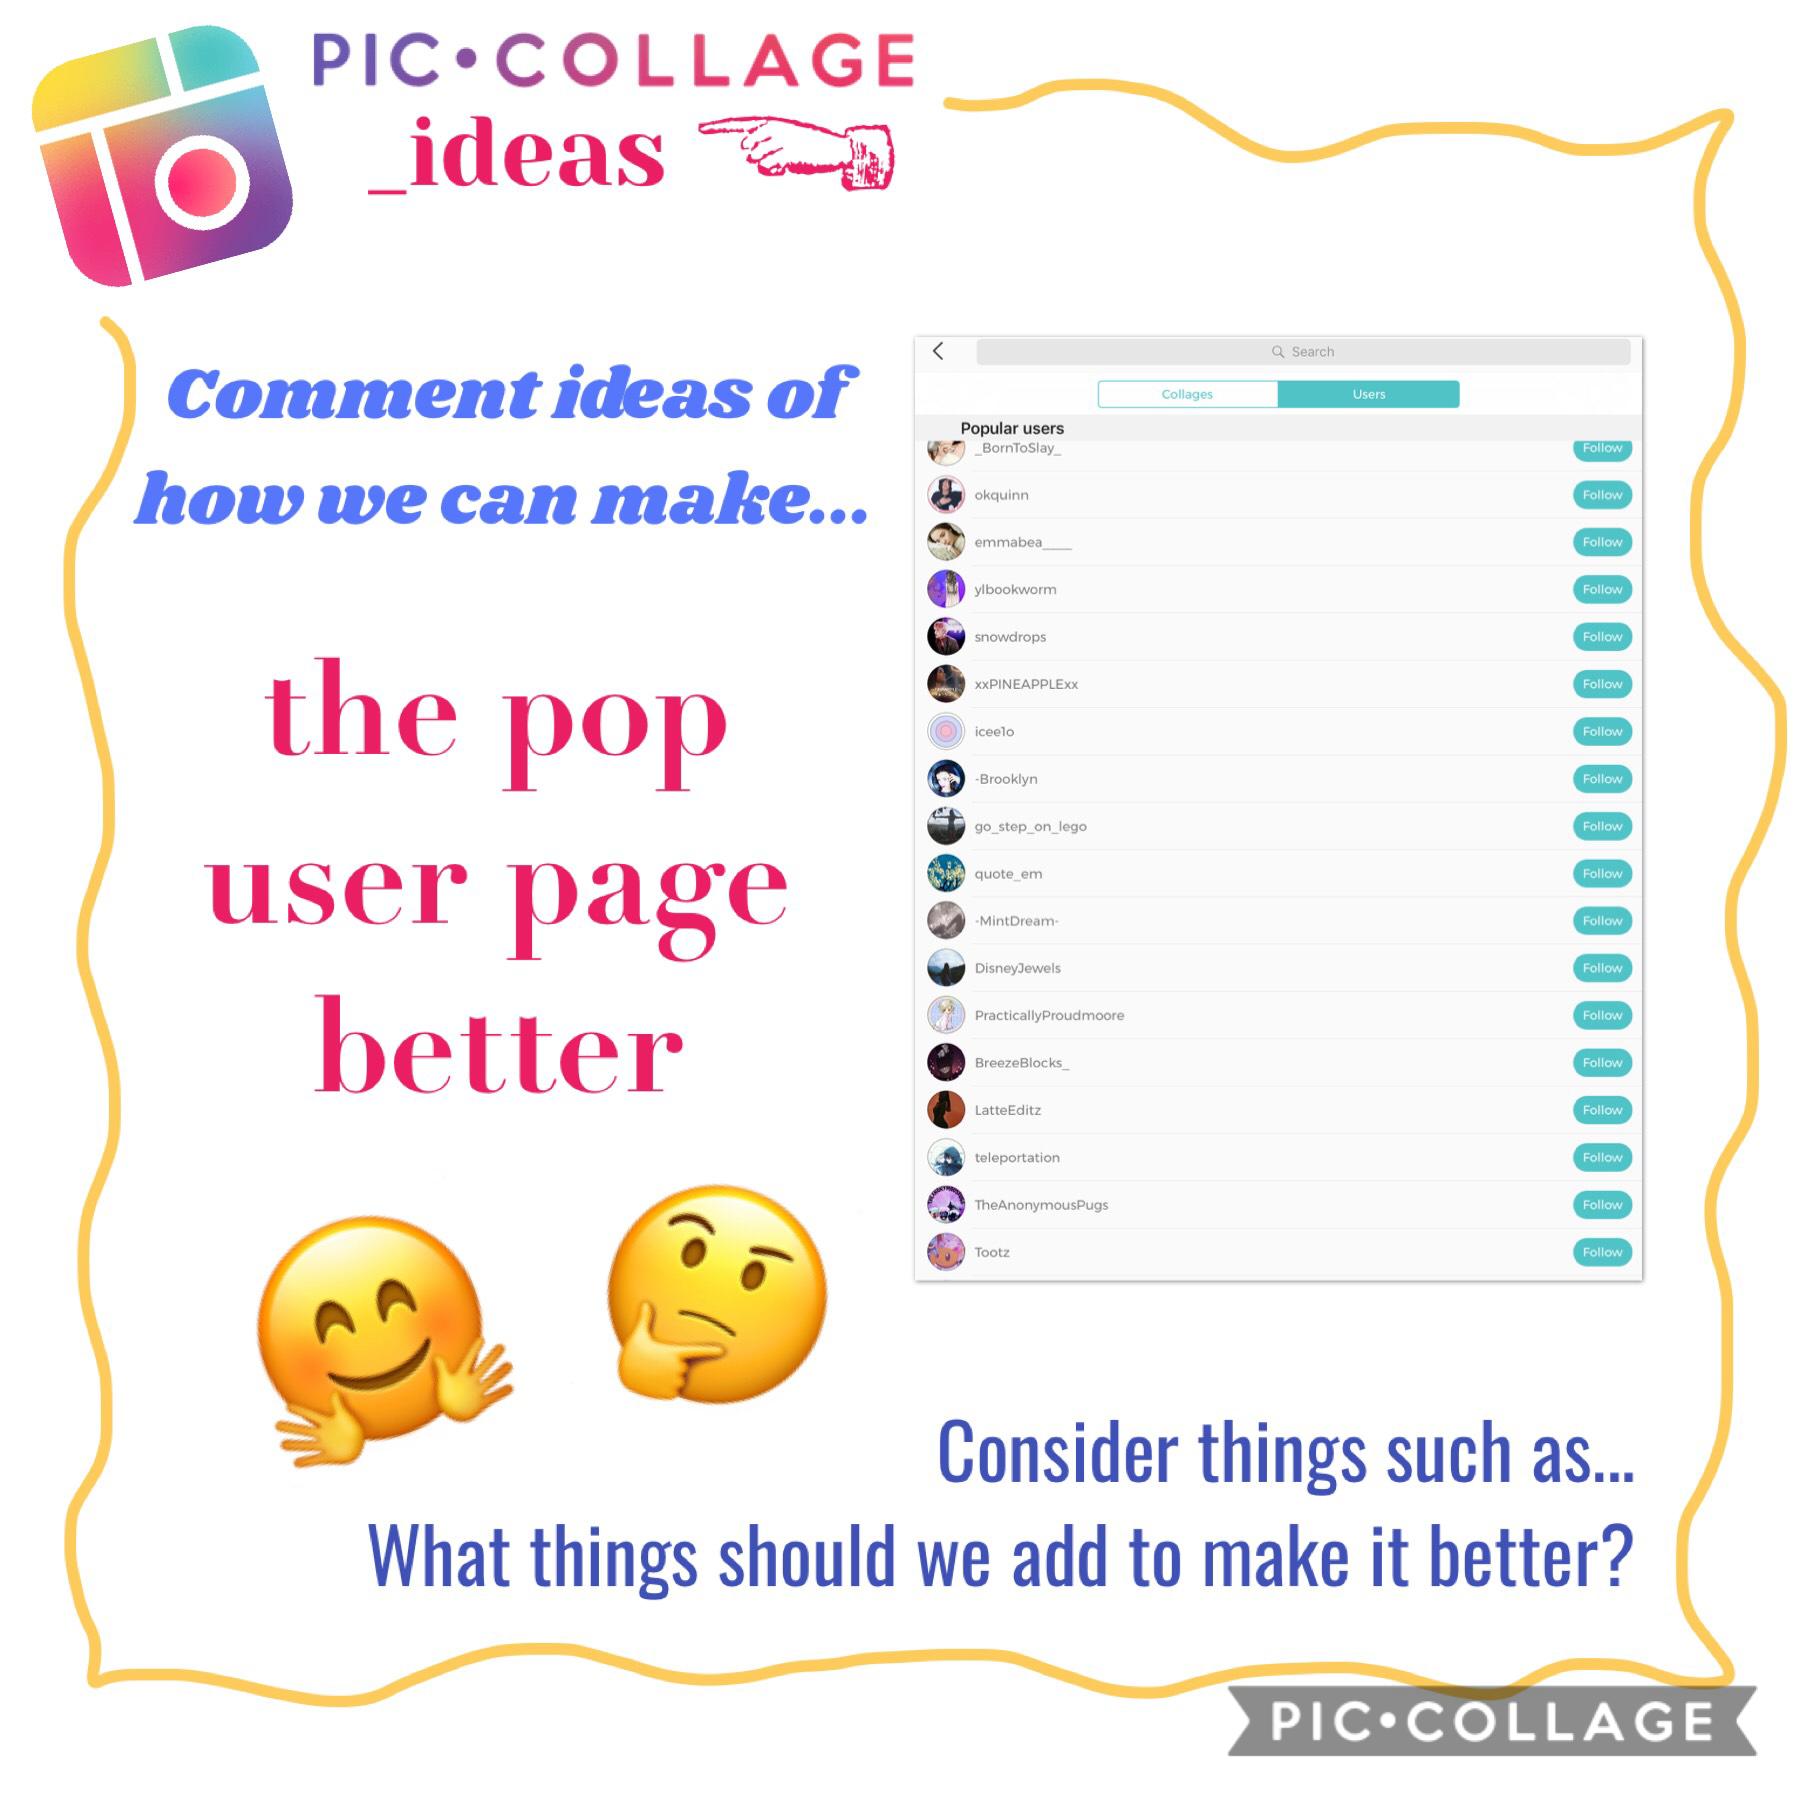 How can we make the pop user page better?